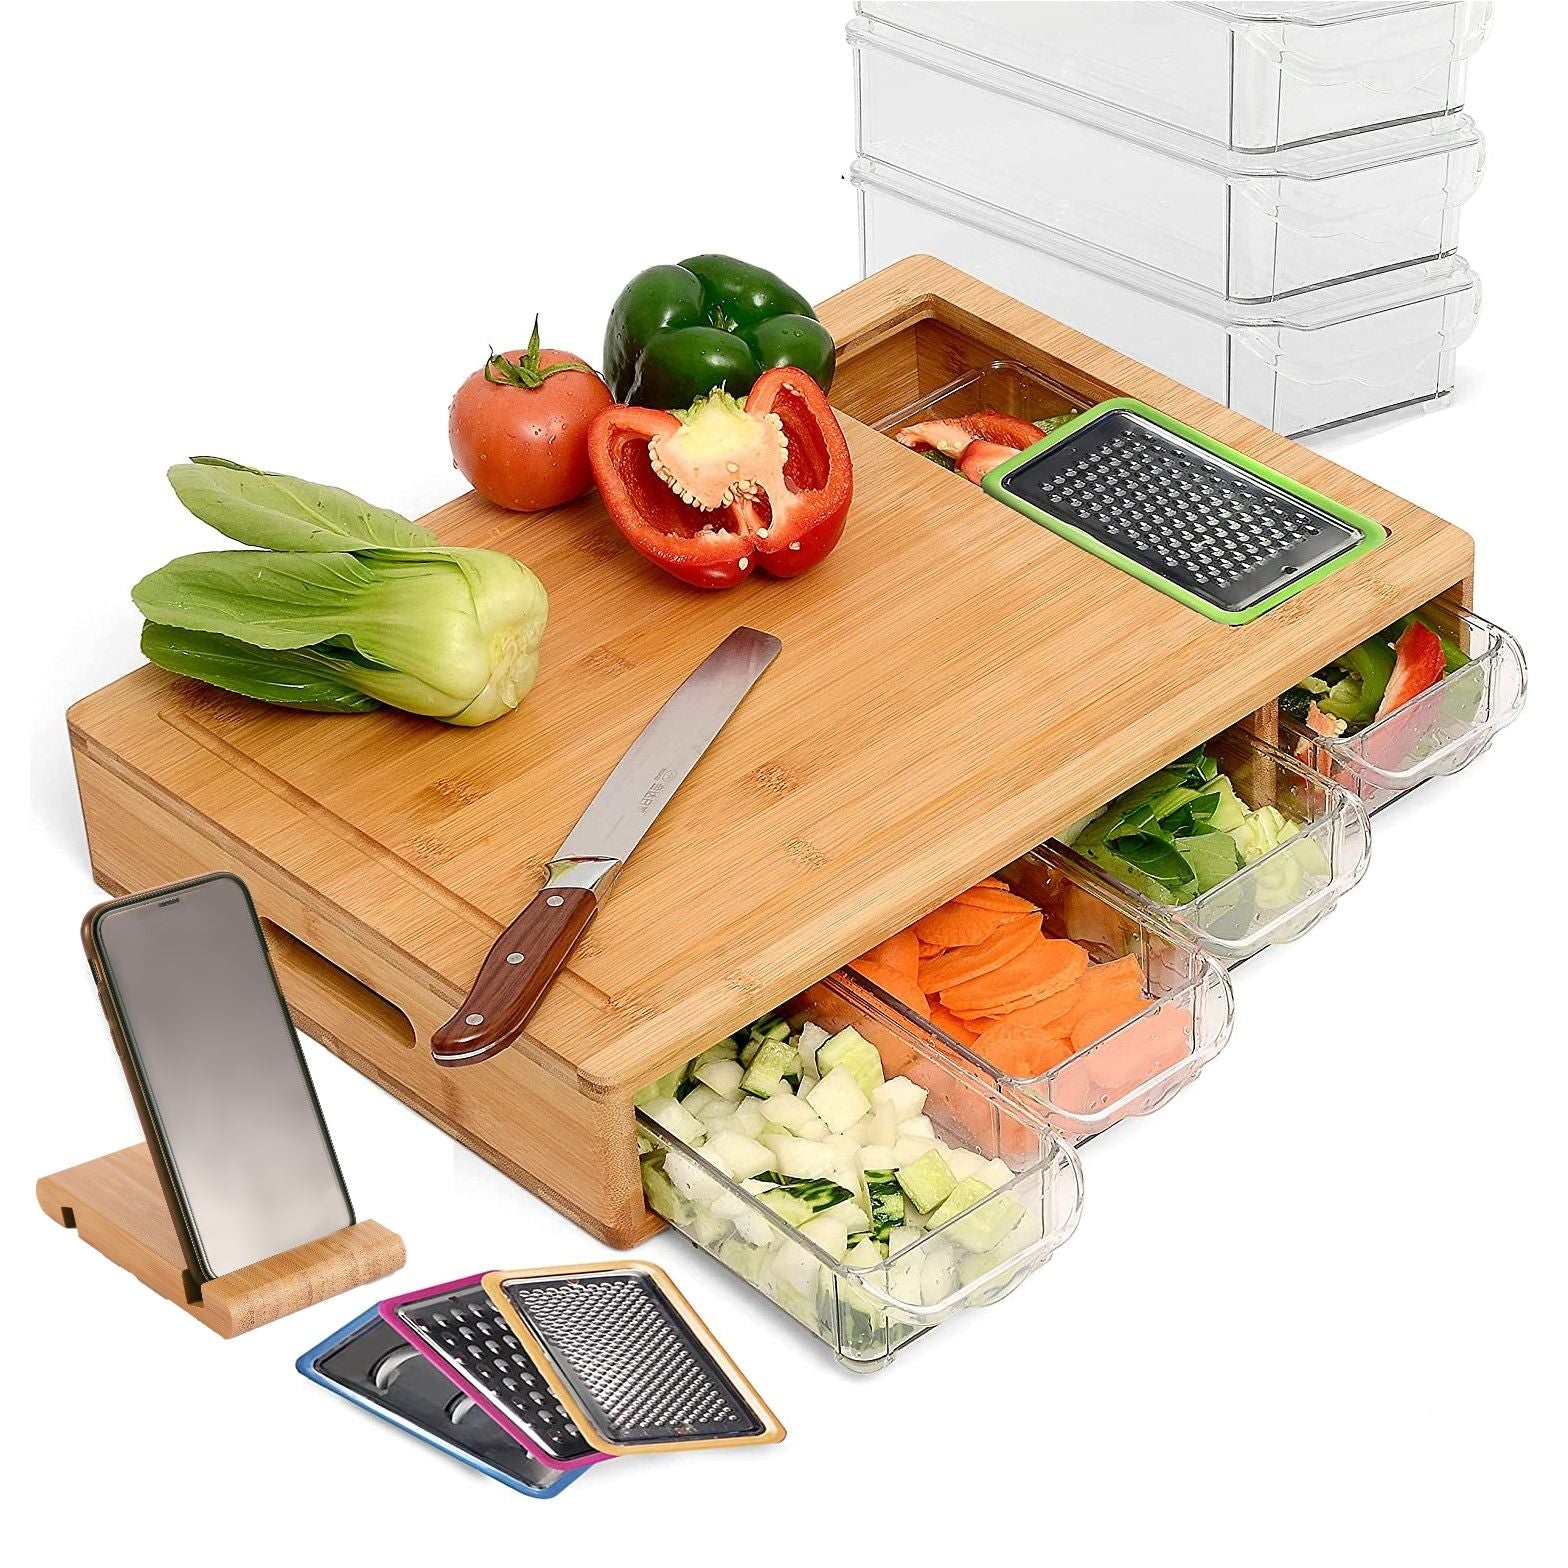 large-bamboo-cutting-board-and-4-containers-with-mobile-holder-gift-included-for-home-kitchen